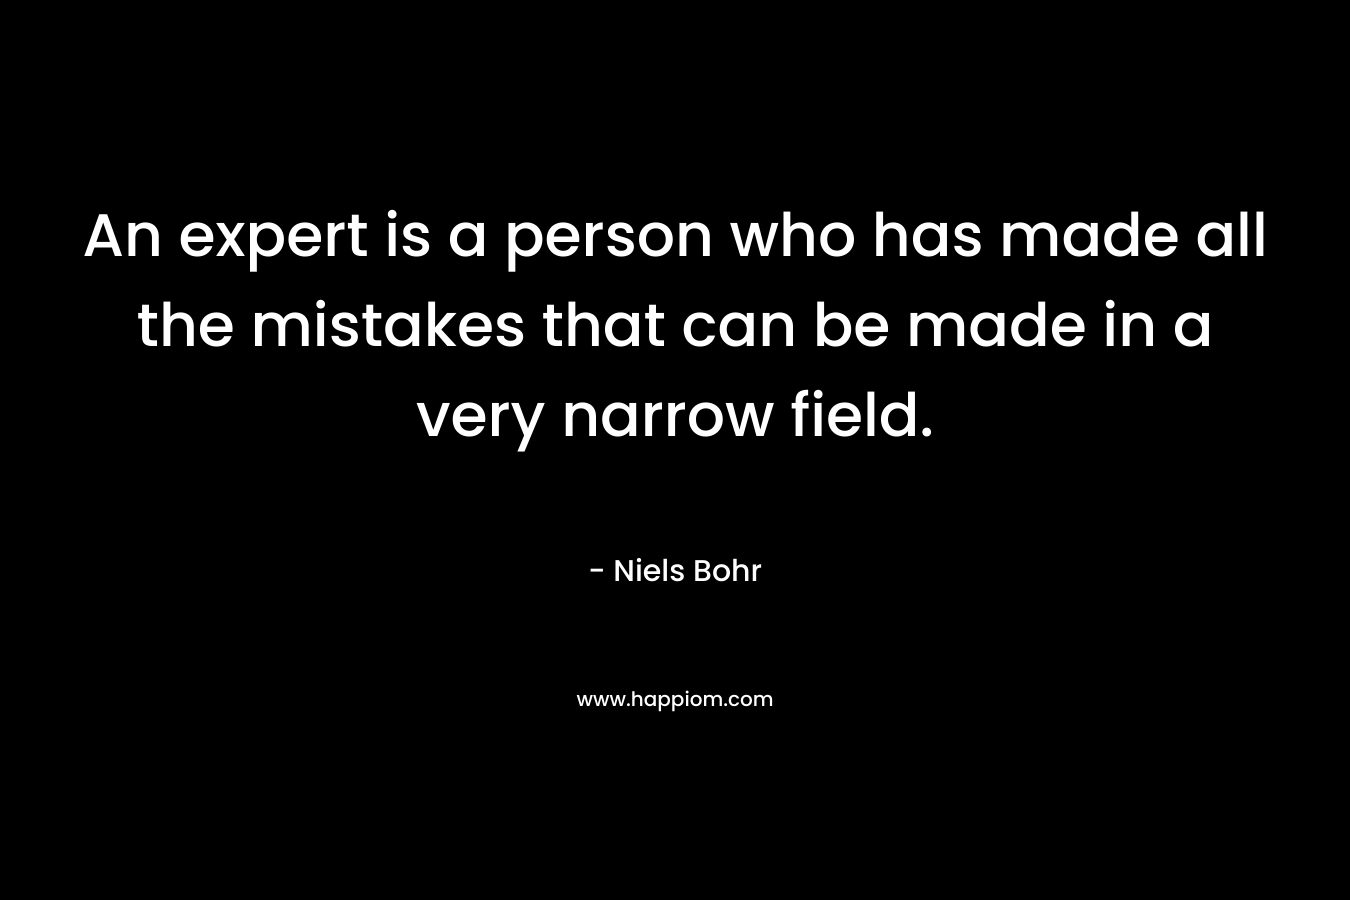 An expert is a person who has made all the mistakes that can be made in a very narrow field. – Niels Bohr